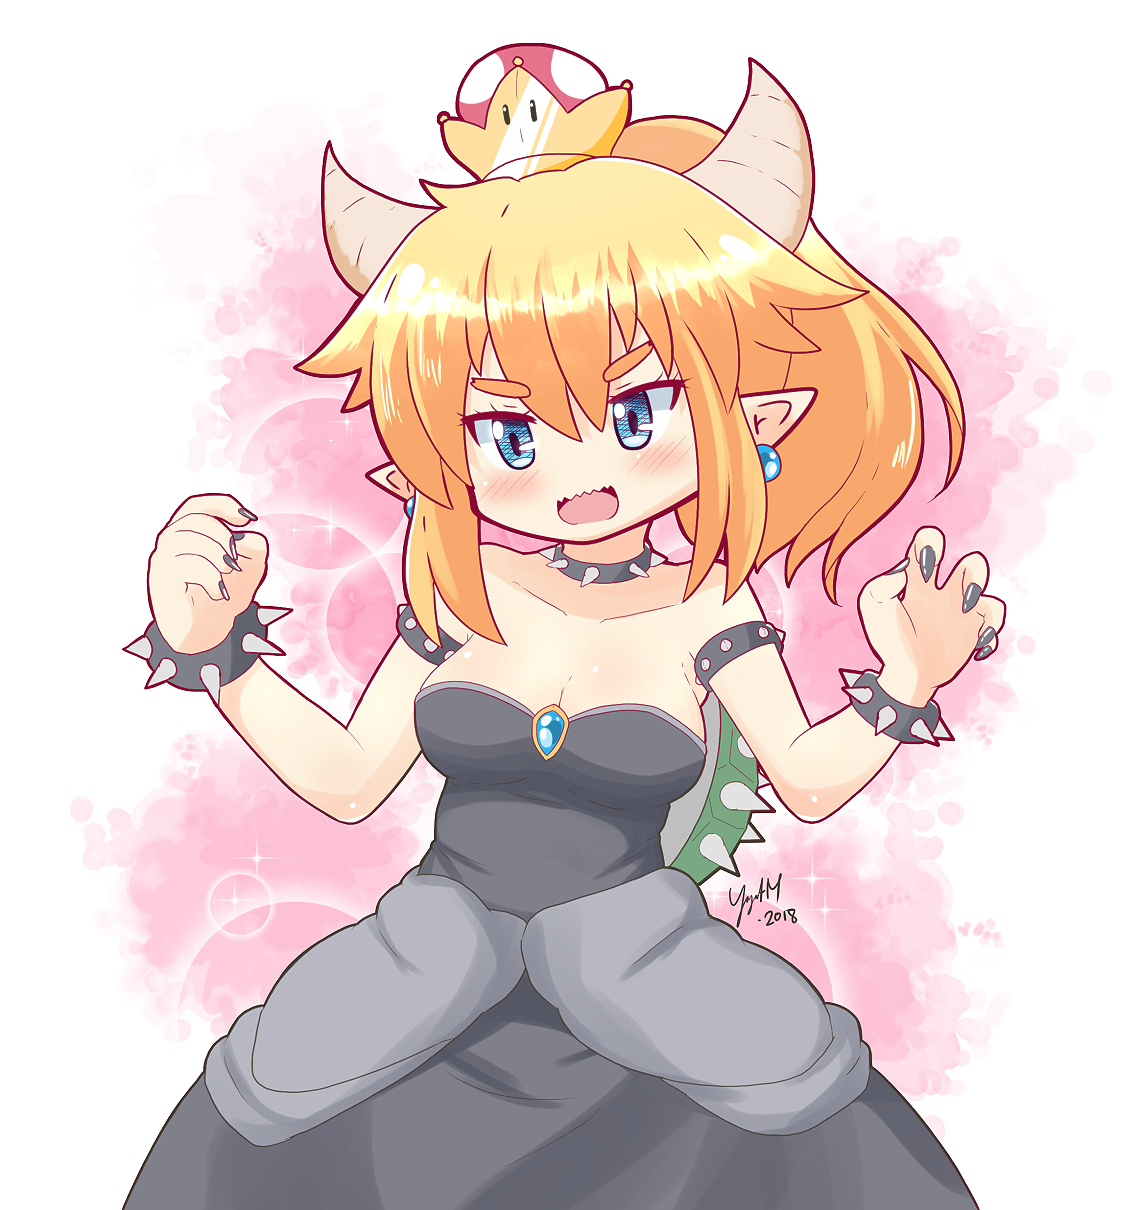 Bowsette - Peach and Bowser - Super Mario - [September 24, 2018]